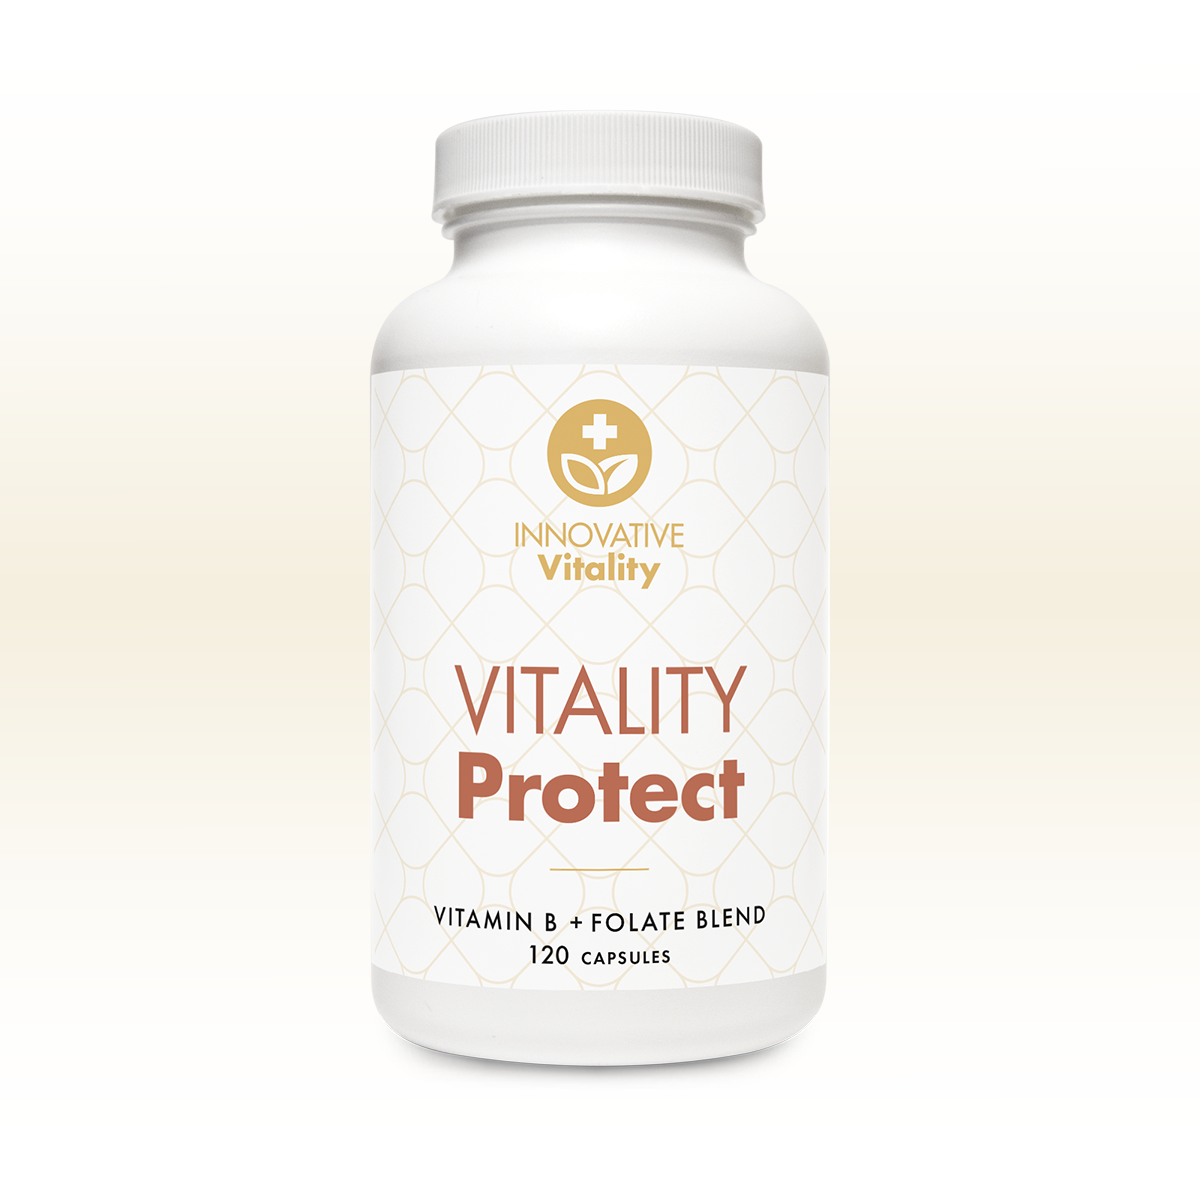 Vitality Protect for Sale Chicago IL